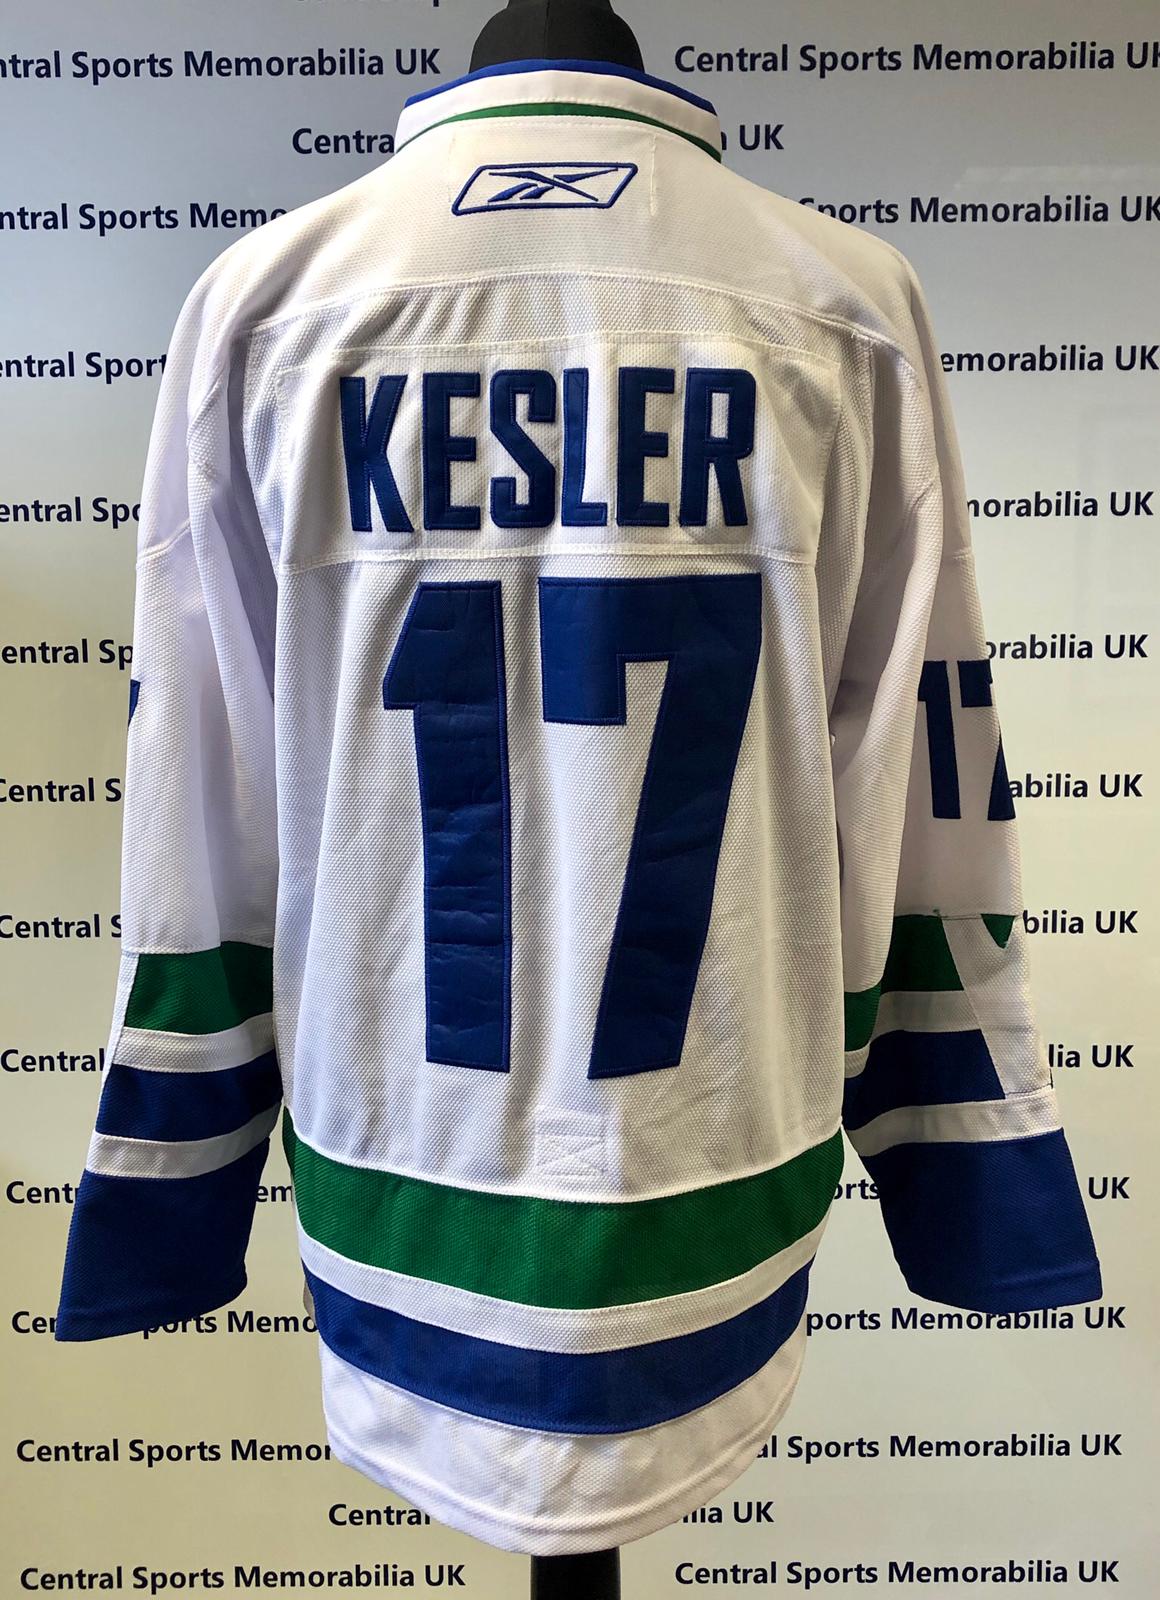 KP on X: Vancouver Canucks adidas jersey concept. Shaped arm